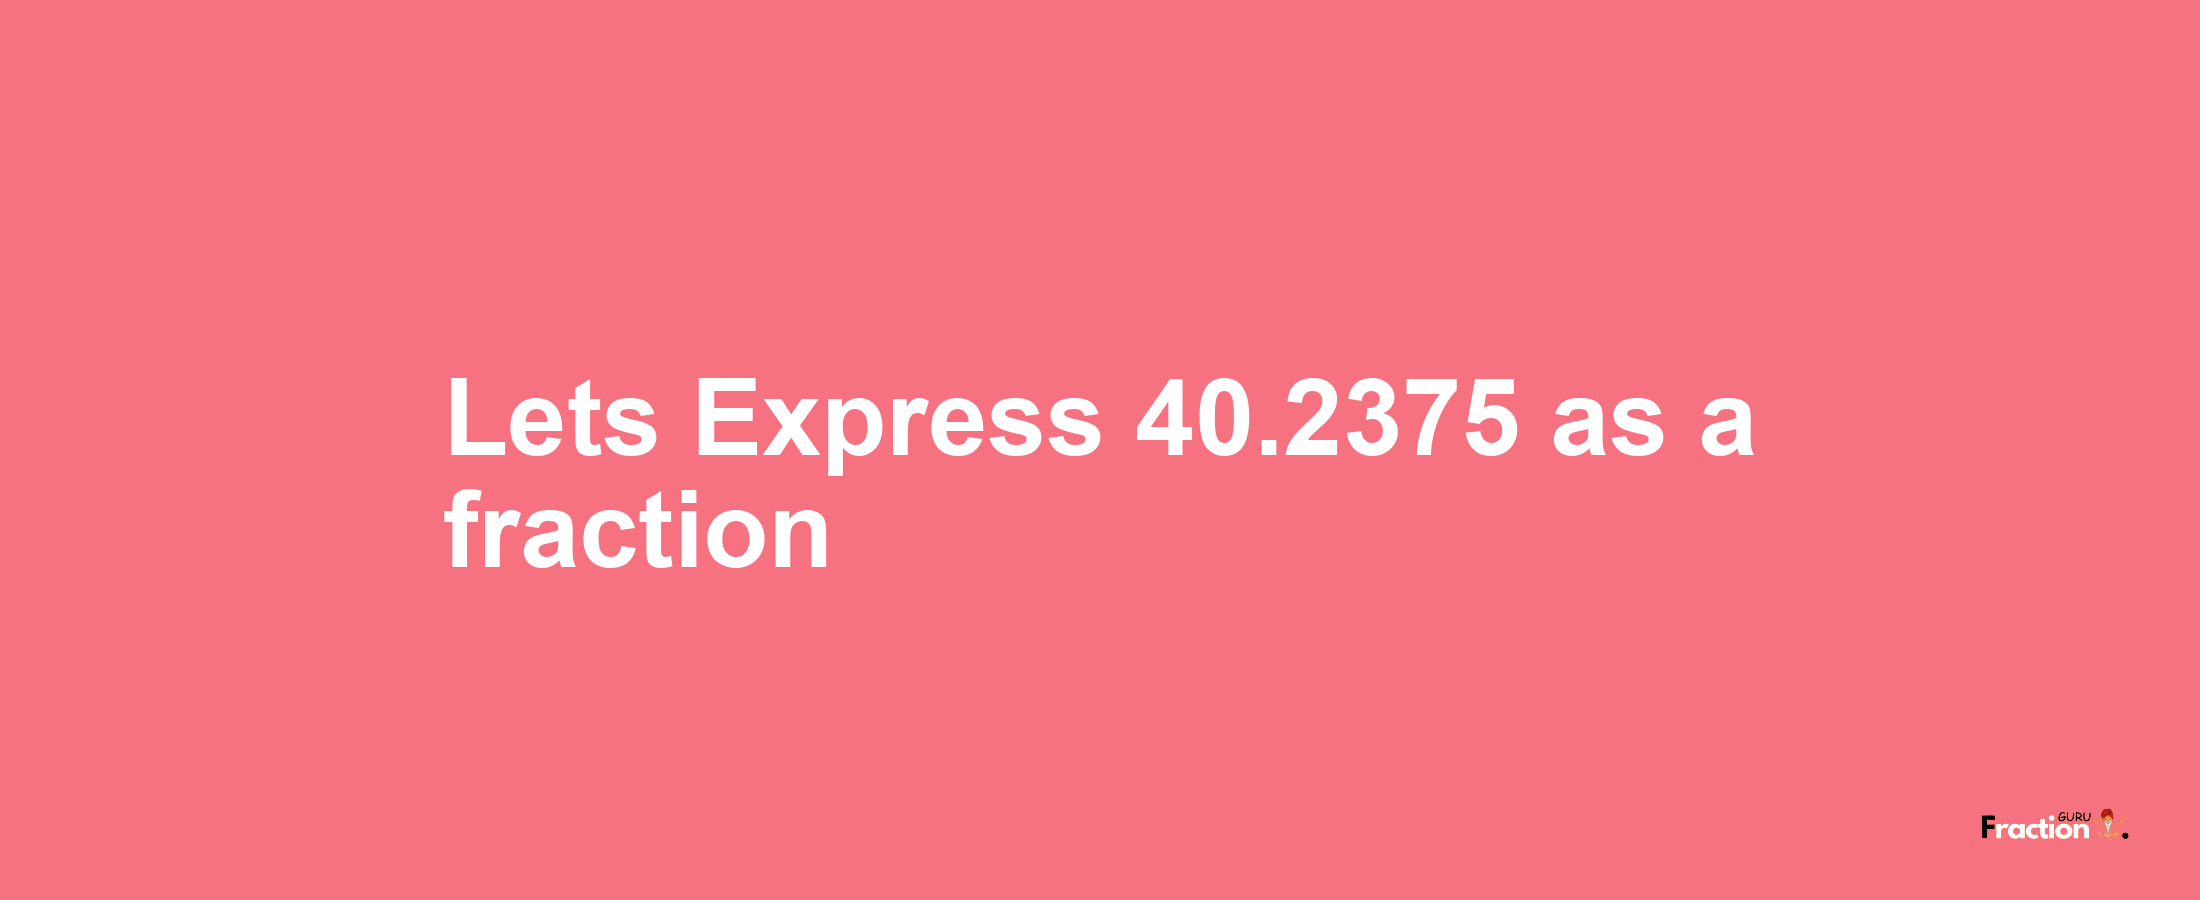 Lets Express 40.2375 as afraction